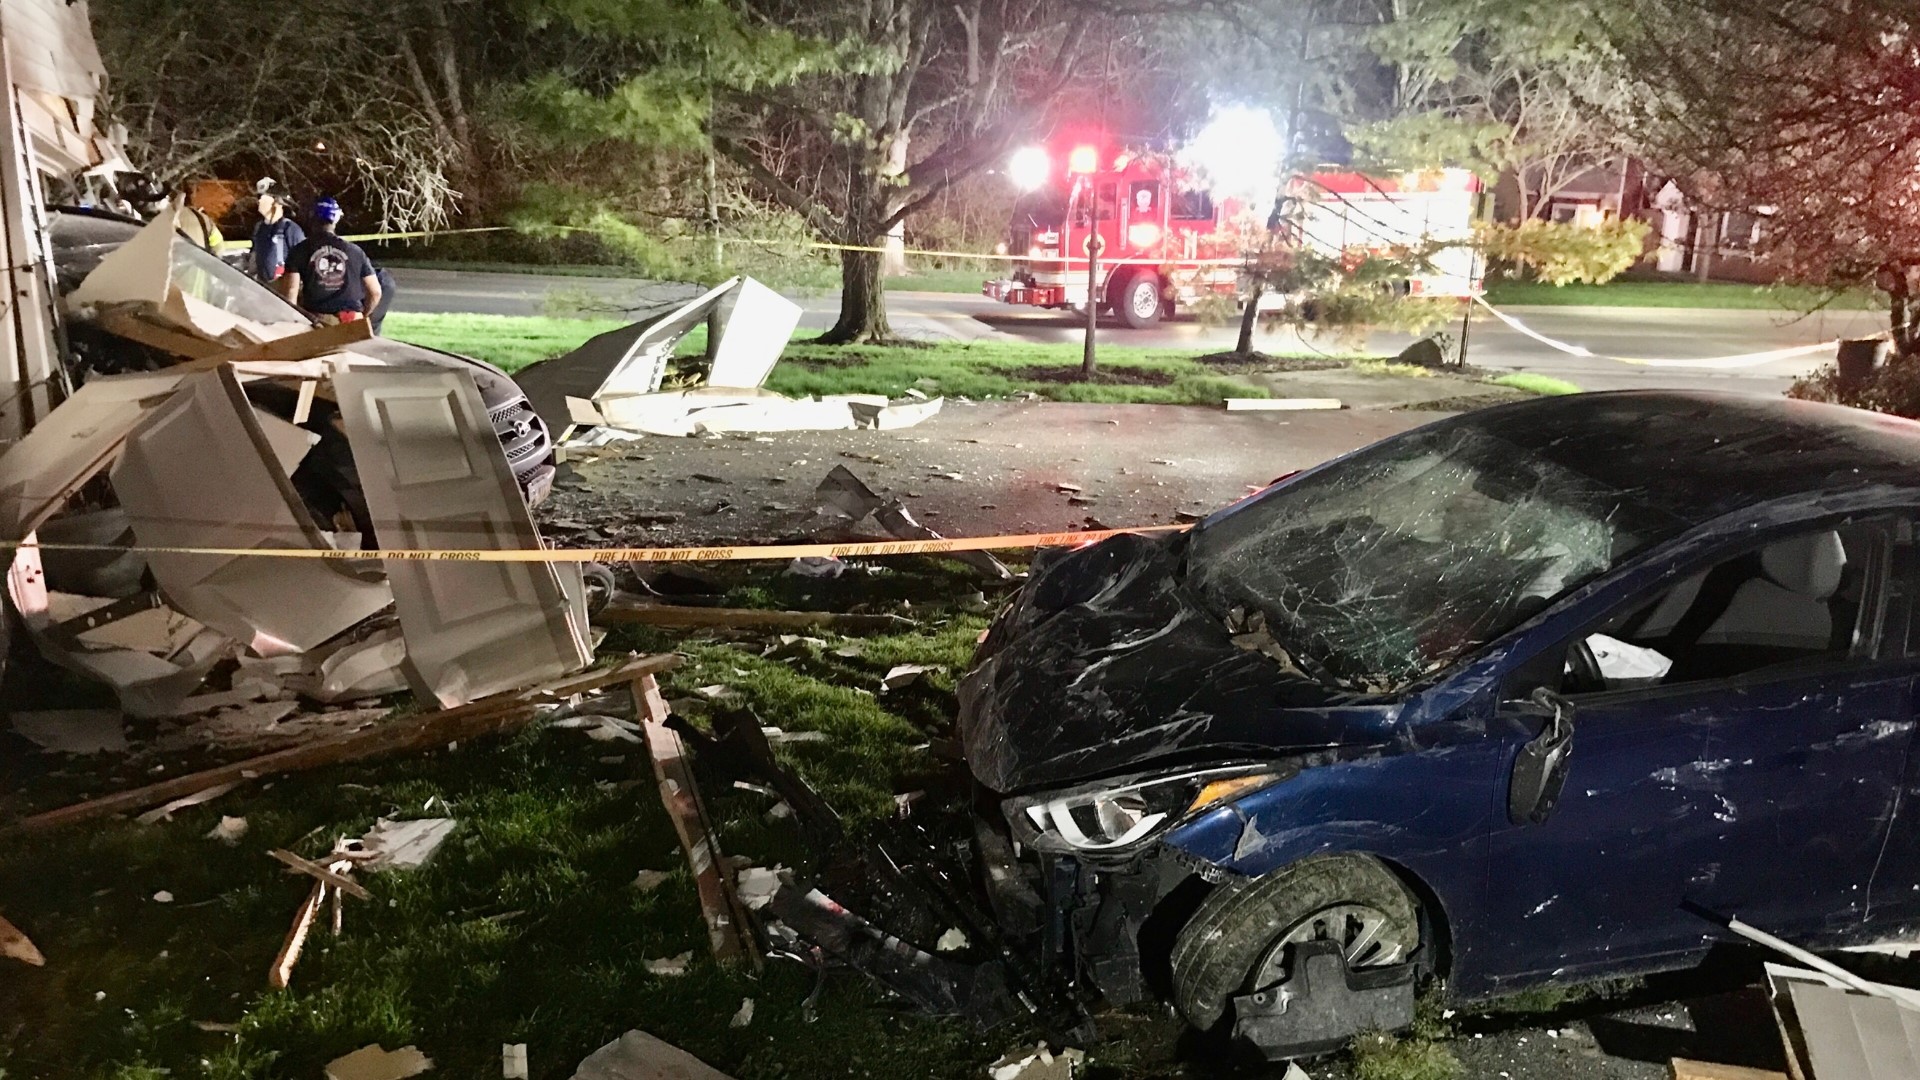 Columbus police said the crash happened just after 4 a.m. in the 2900 block of West Case Road. The driver of the vehicle then fled the scene, police said.